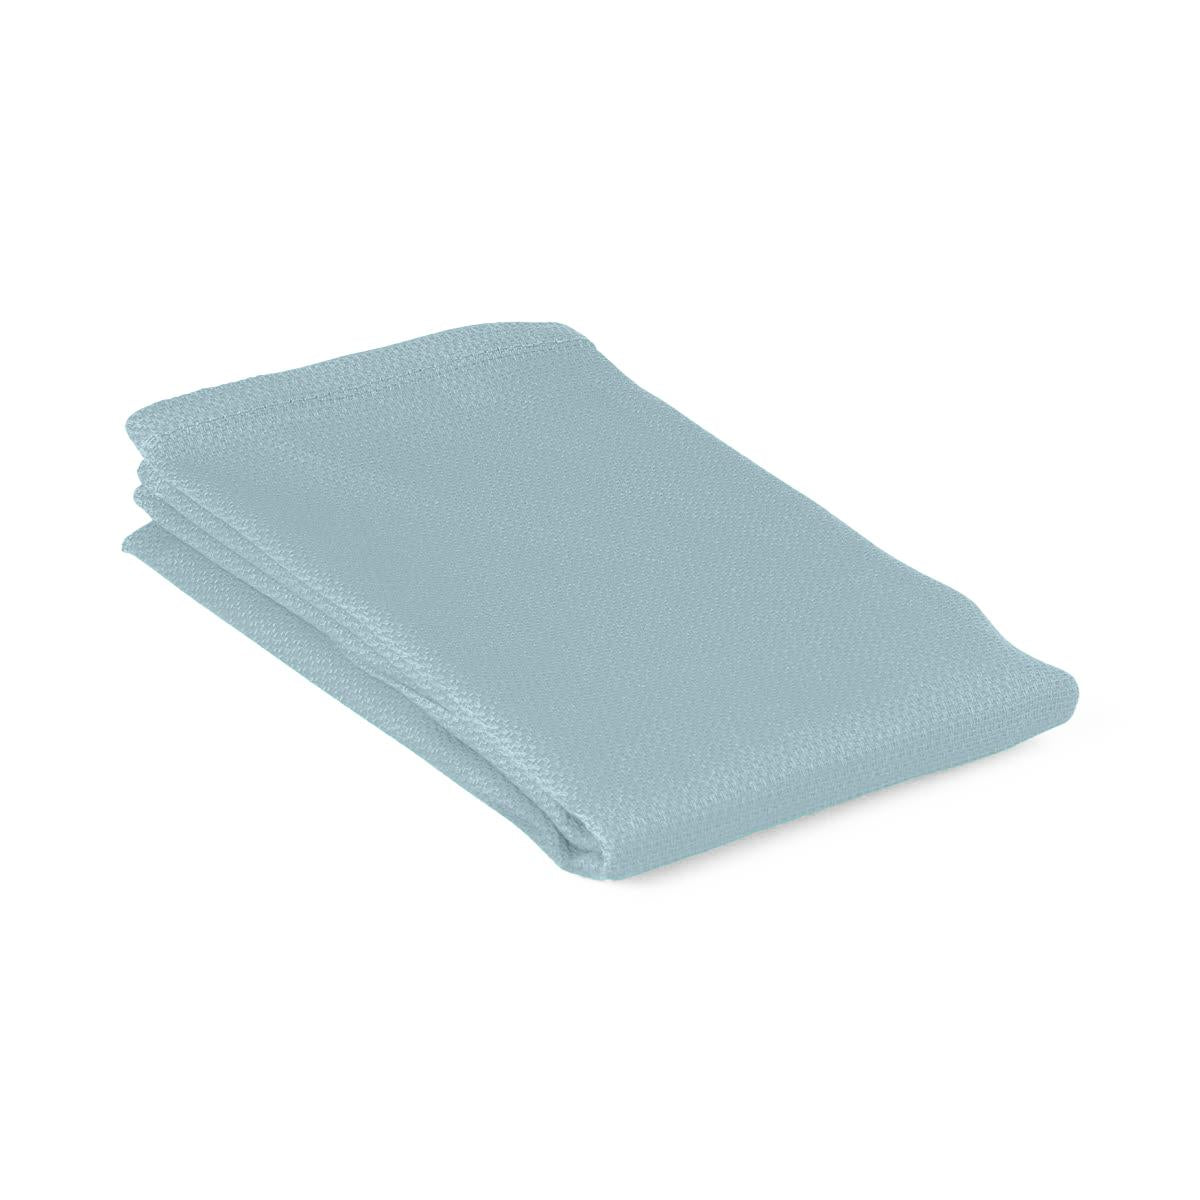 Sterile O.R. Towels (Box of 12)